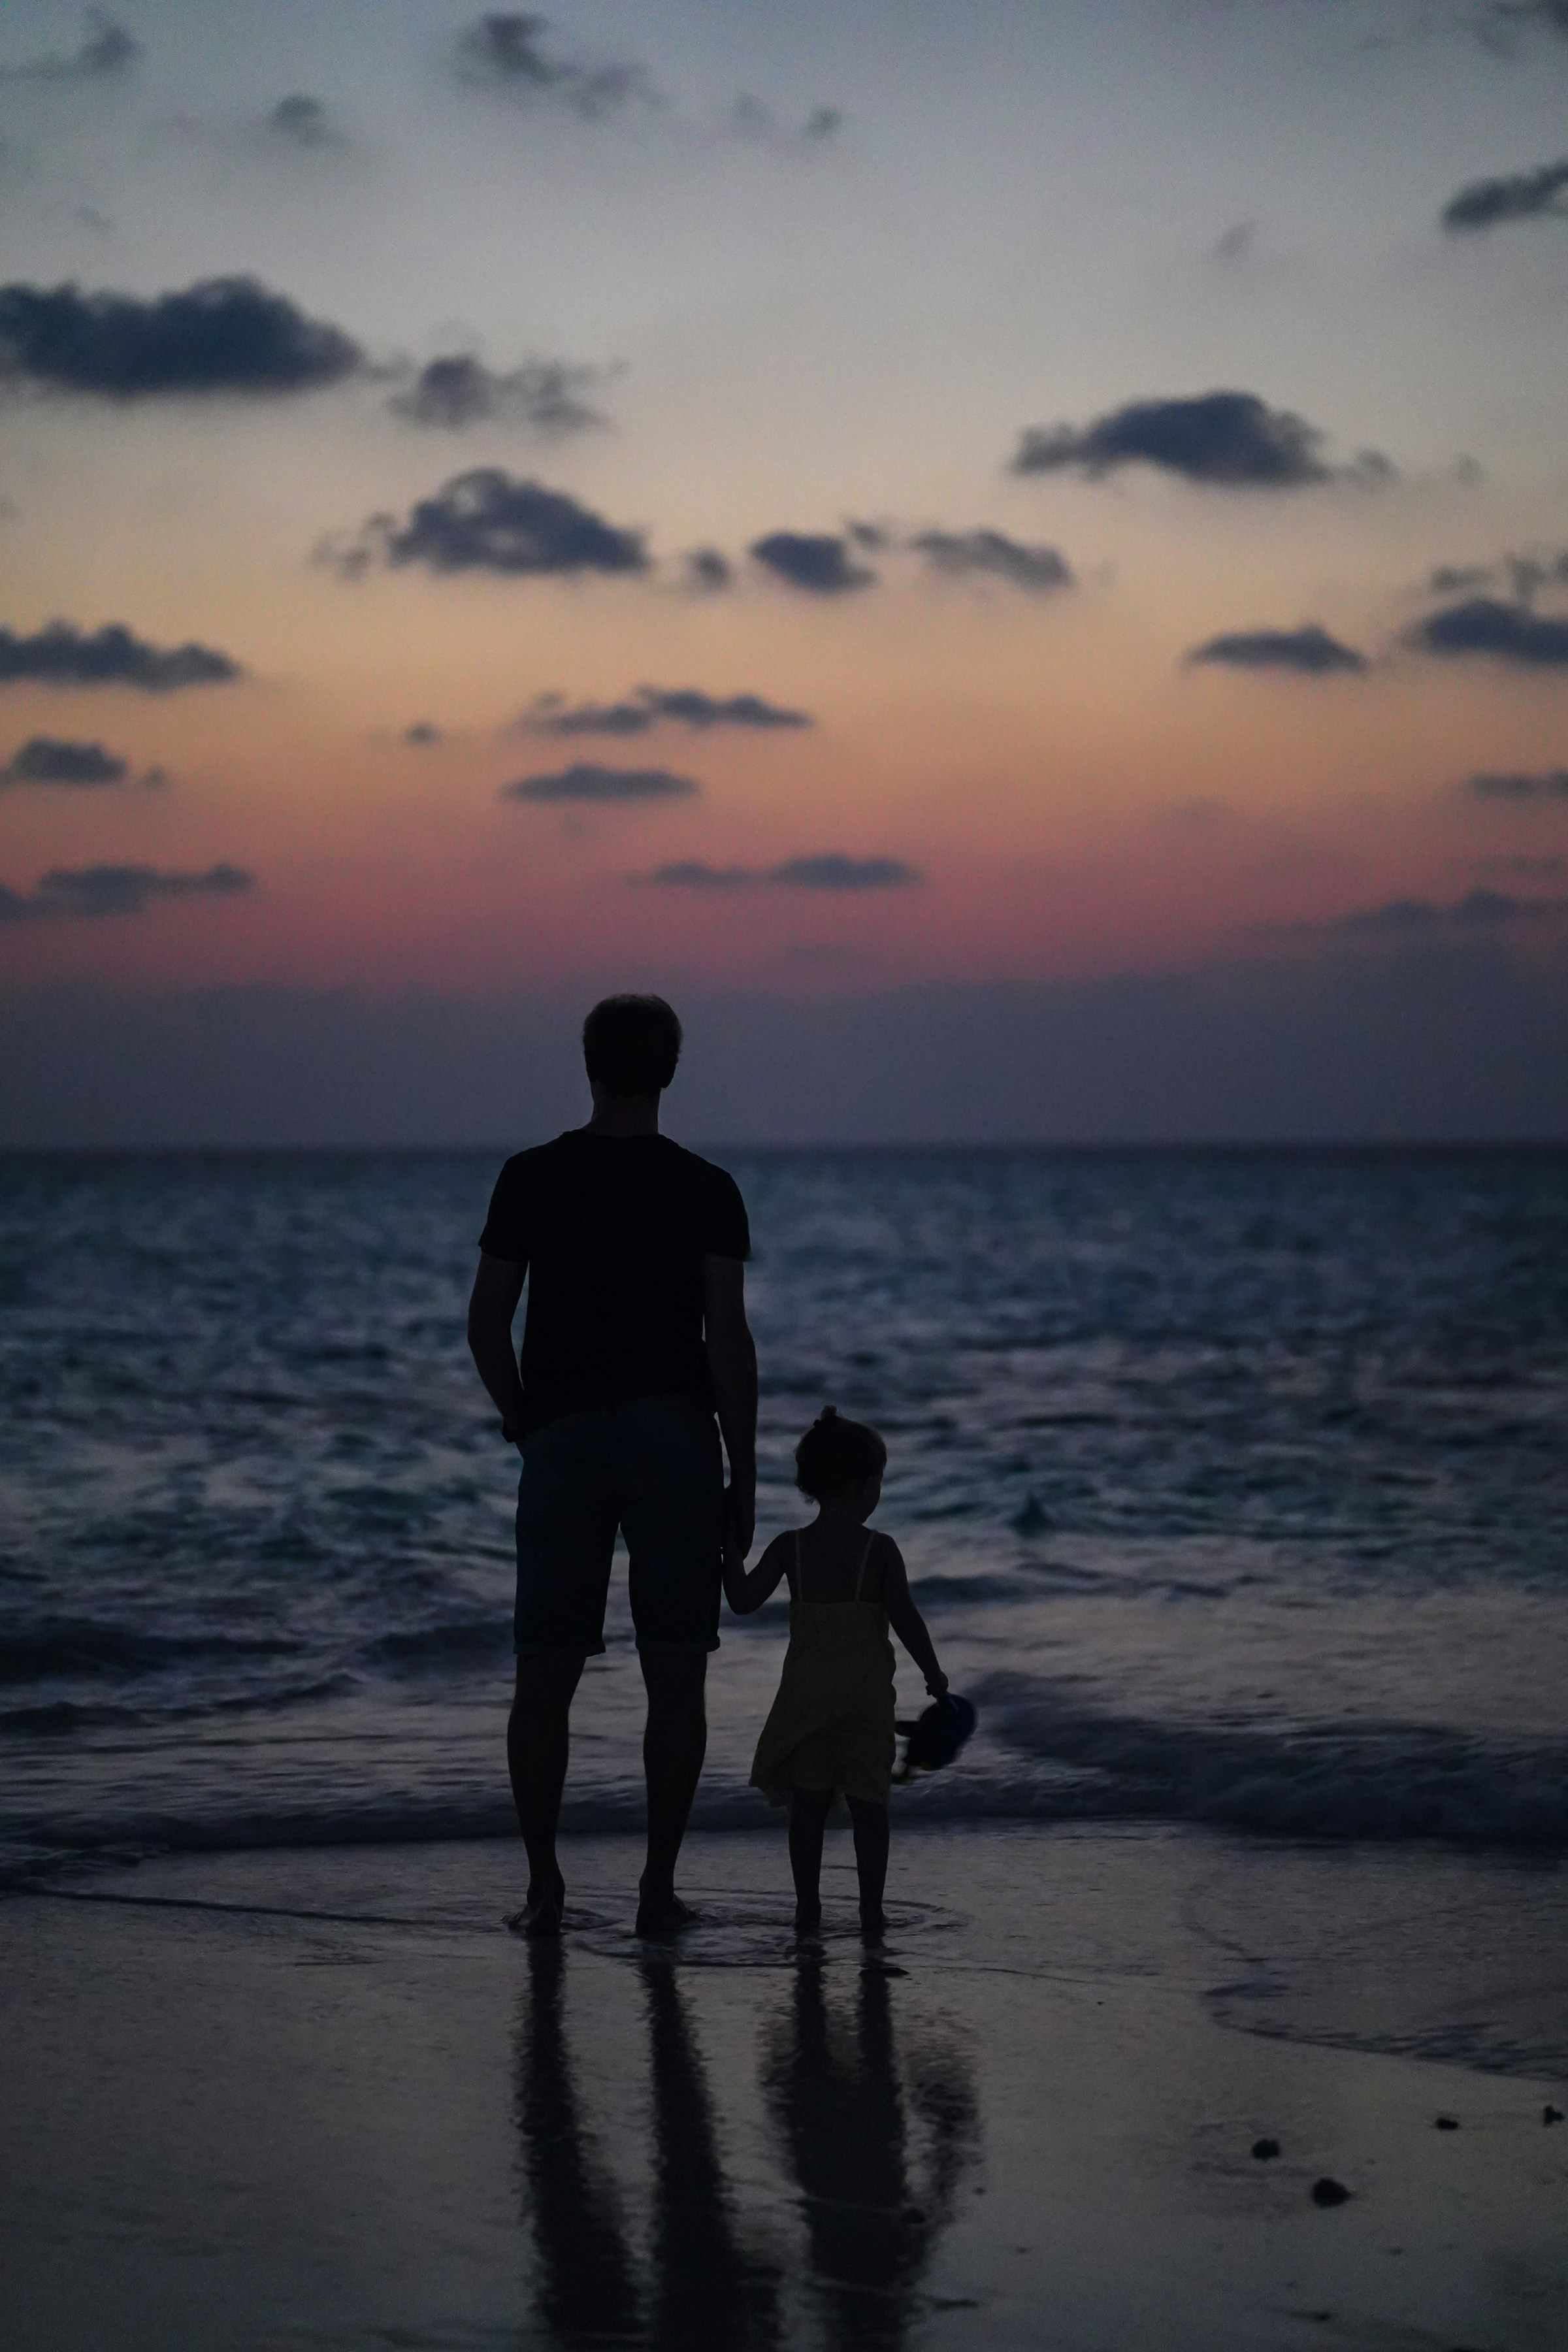 A father and daughter duo | Source: Unsplash